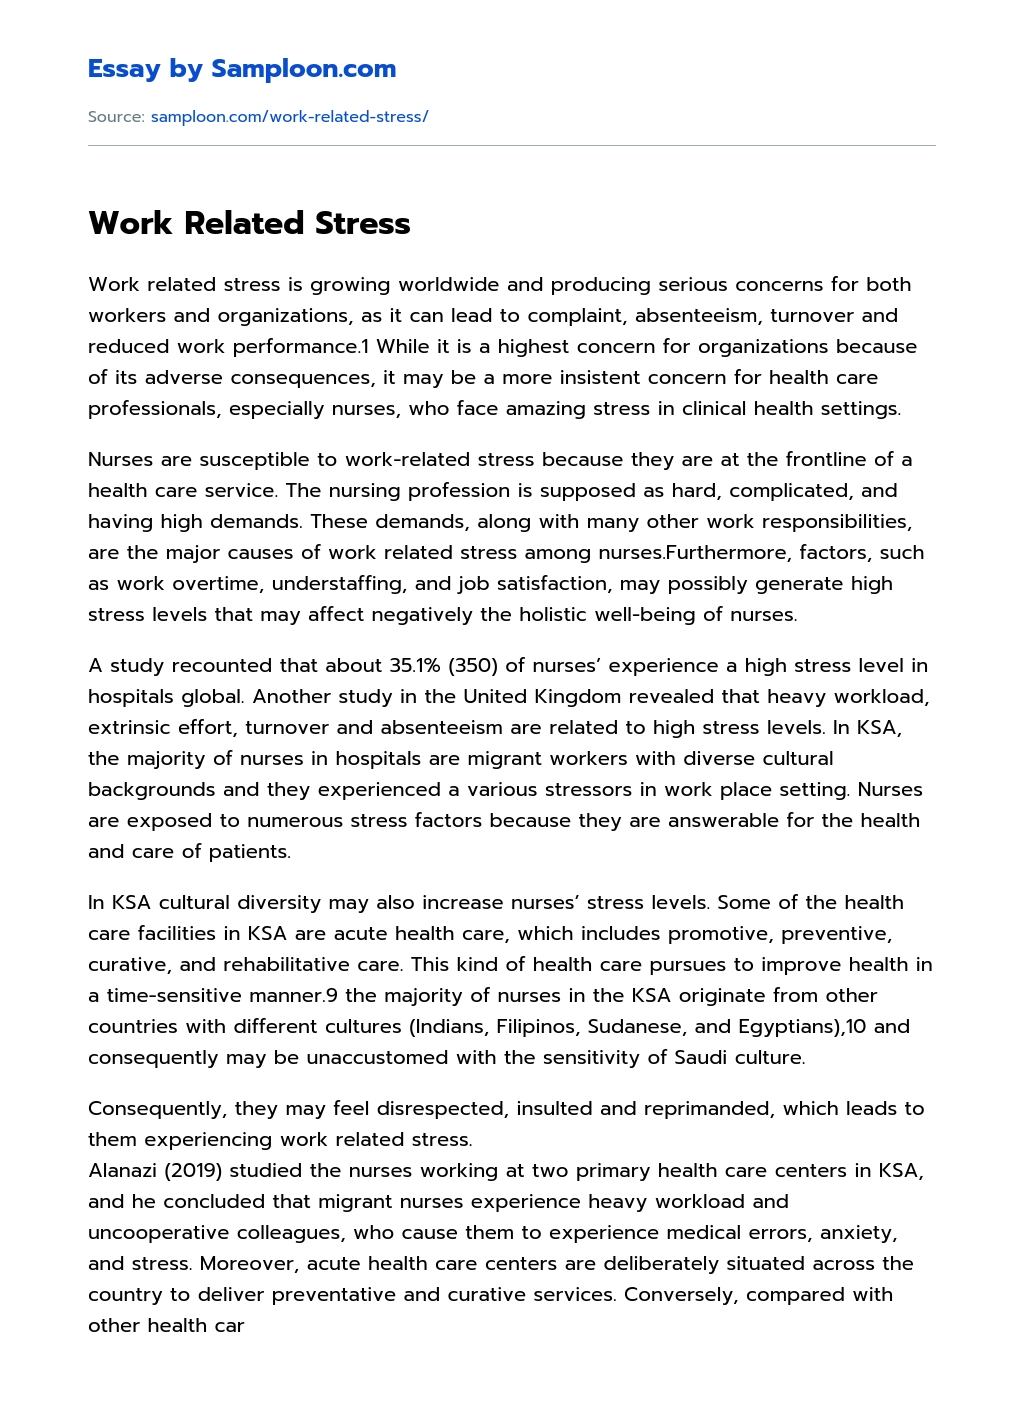 Work Related Stress essay